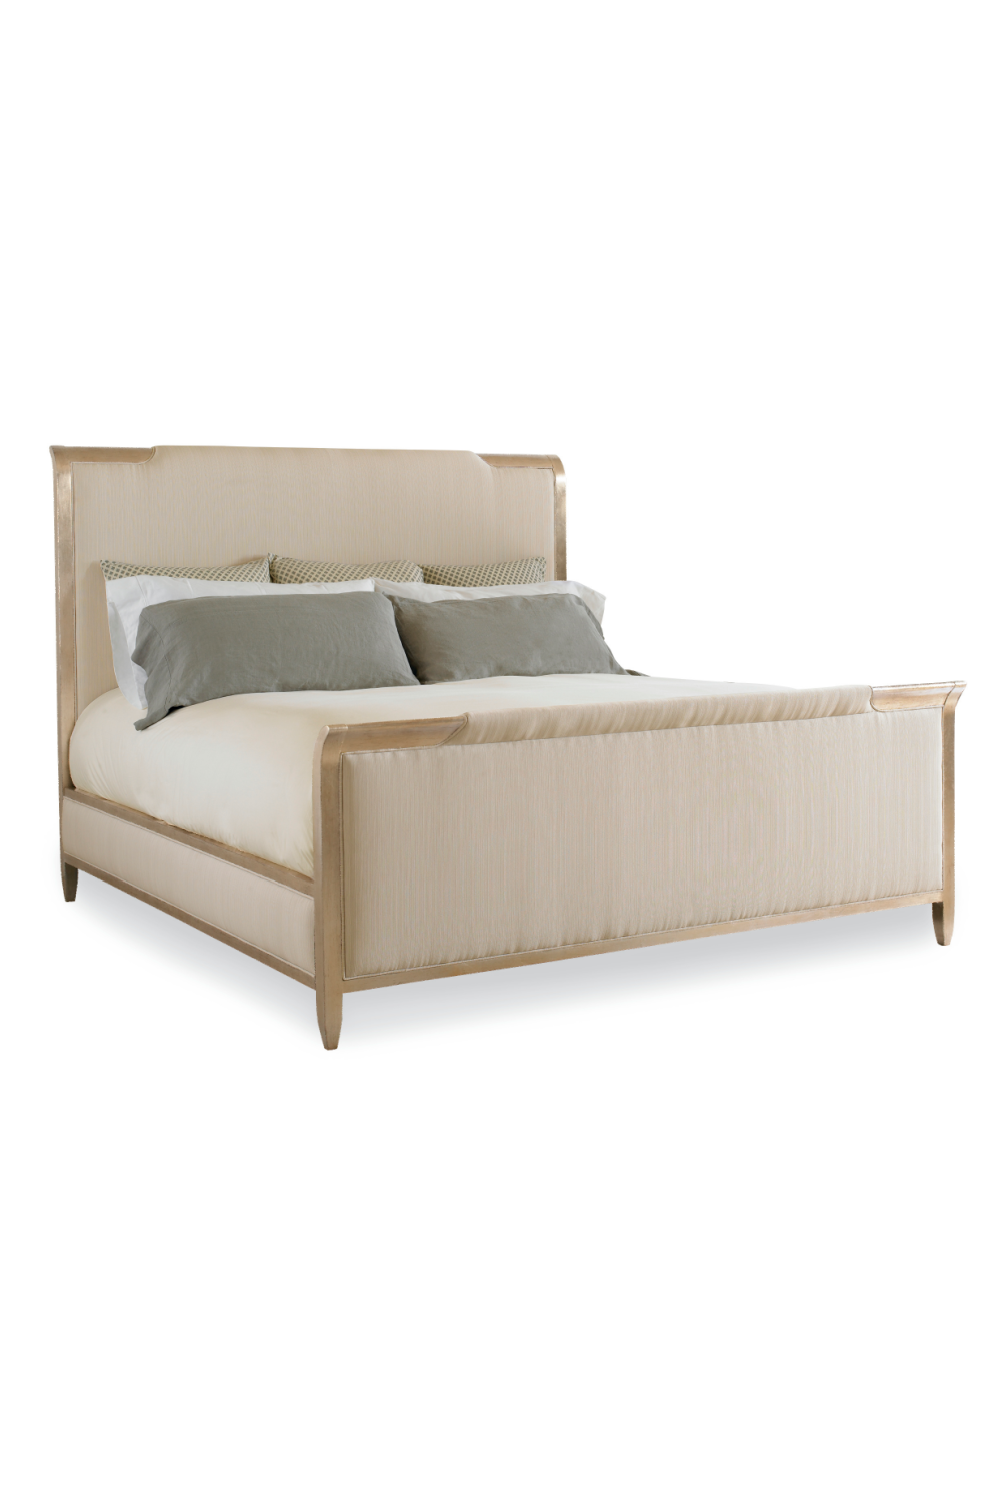 Off White Weave King Bed | Caracole Nite In Shining Armor  | Oroa.com